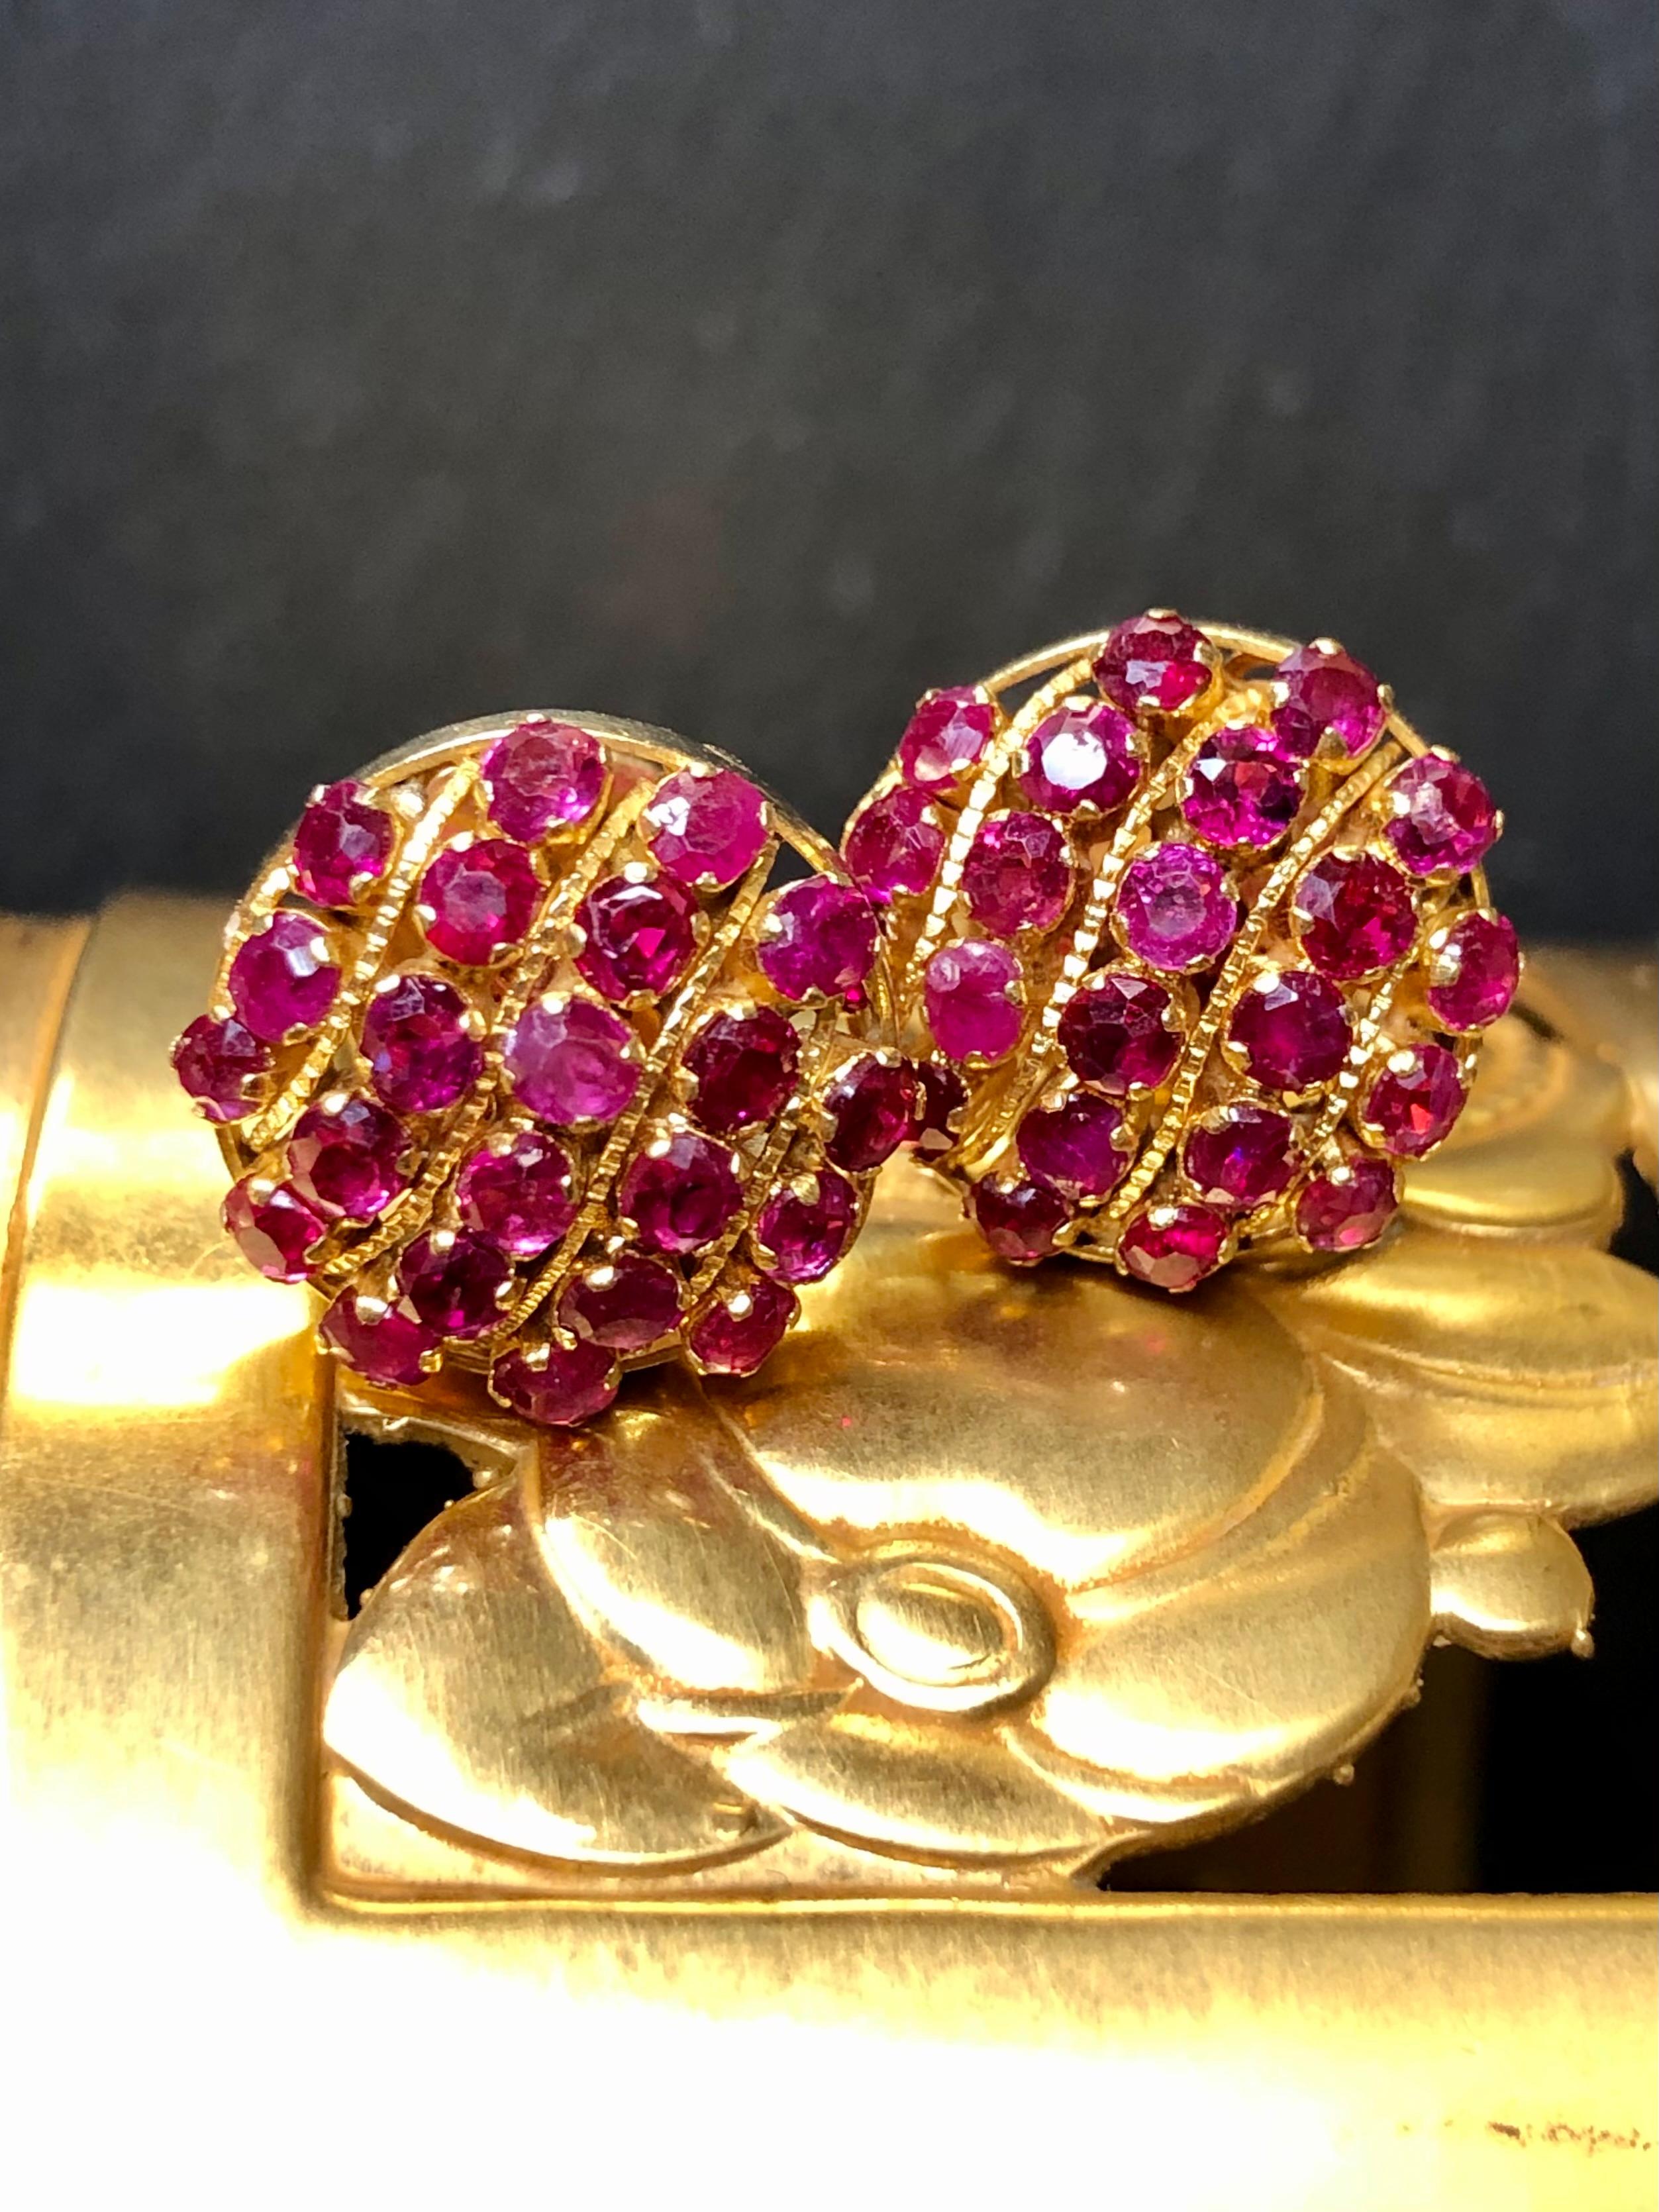 
A lovely pair of earrings crafted in deep, 24k yellow gold and prong set with approximately 4cttw in natural, vibrant red rubies.


Dimensions/Weight:

Earrings measure .53” in diameter and weigh 4.7g.


Condition:

All stones are secure and in